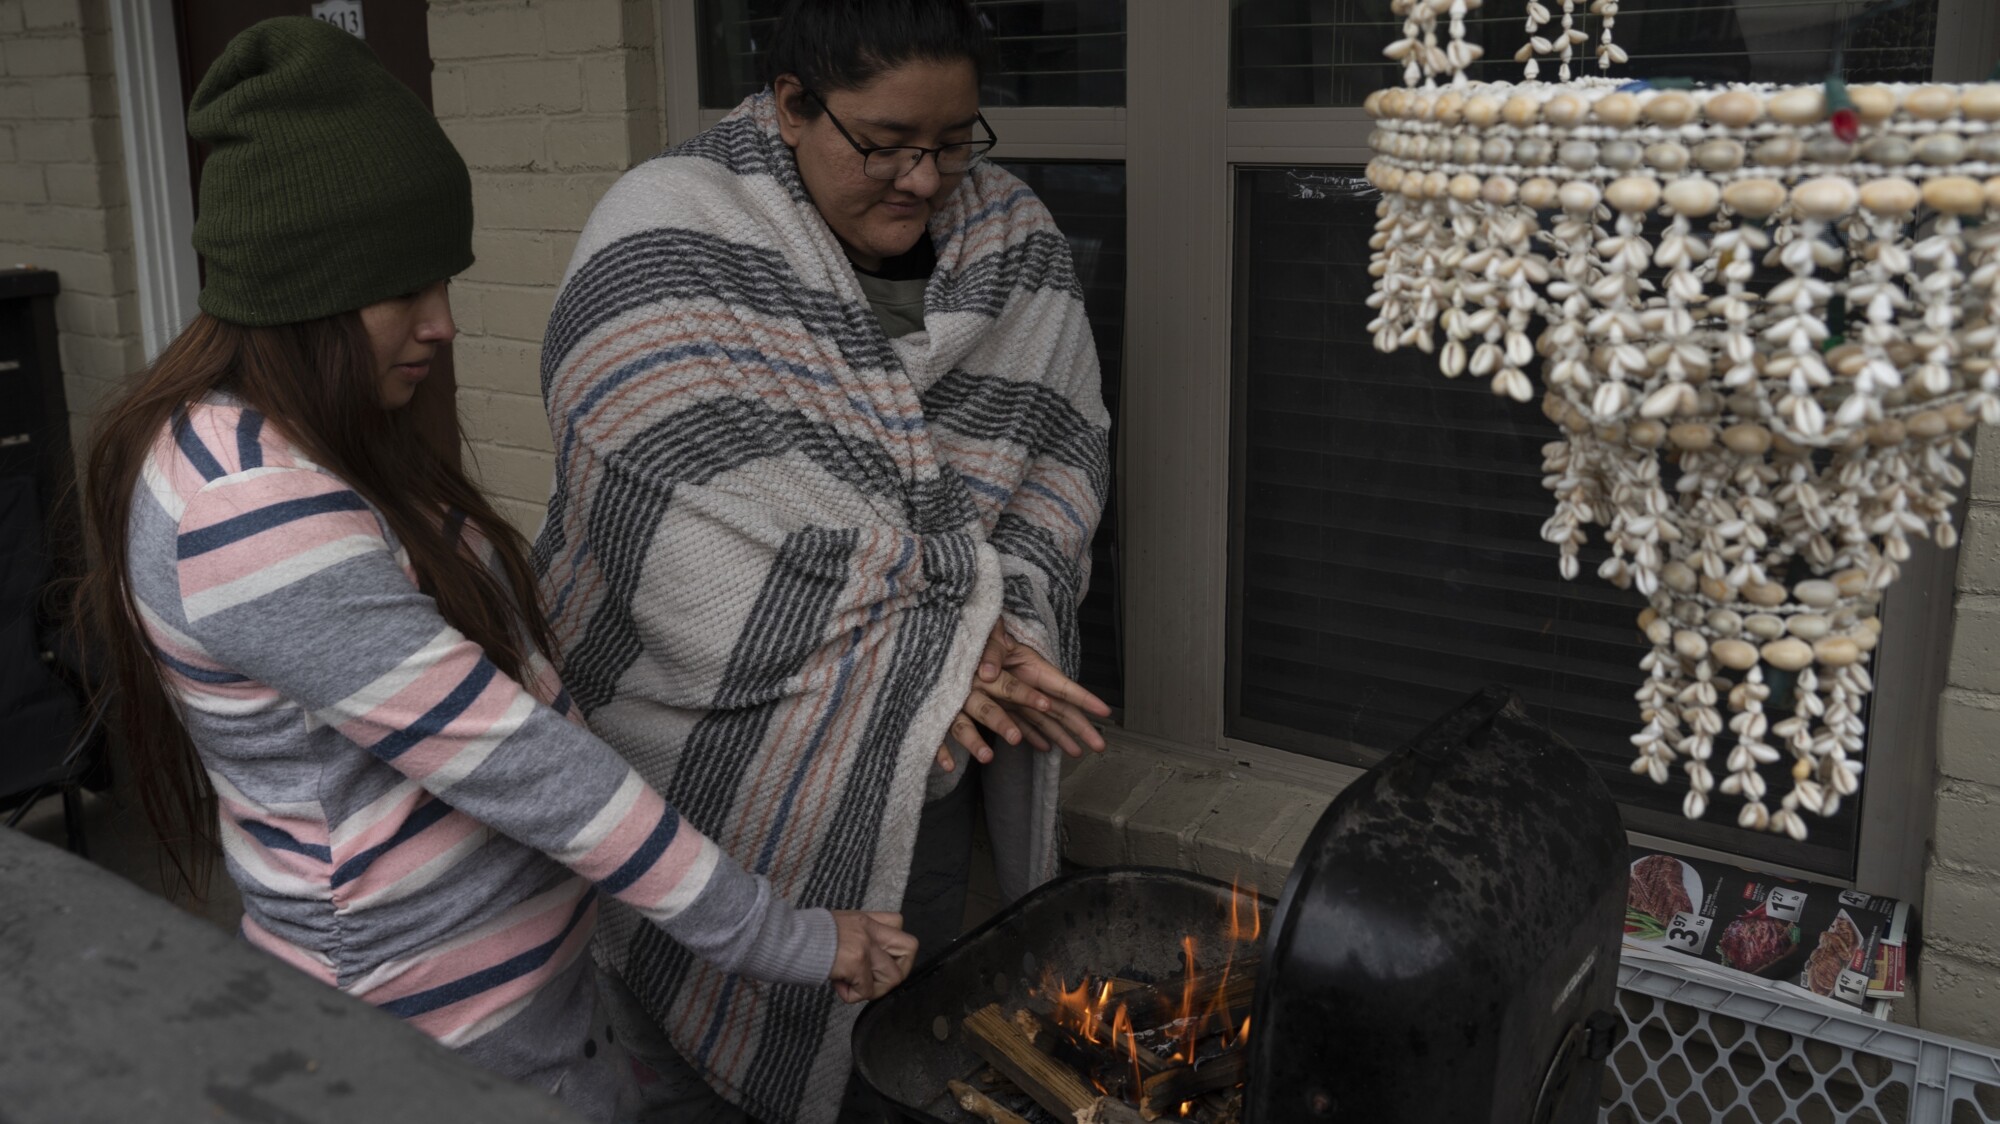 Texans Find Creative Ways to Stay Warm Amid Outage